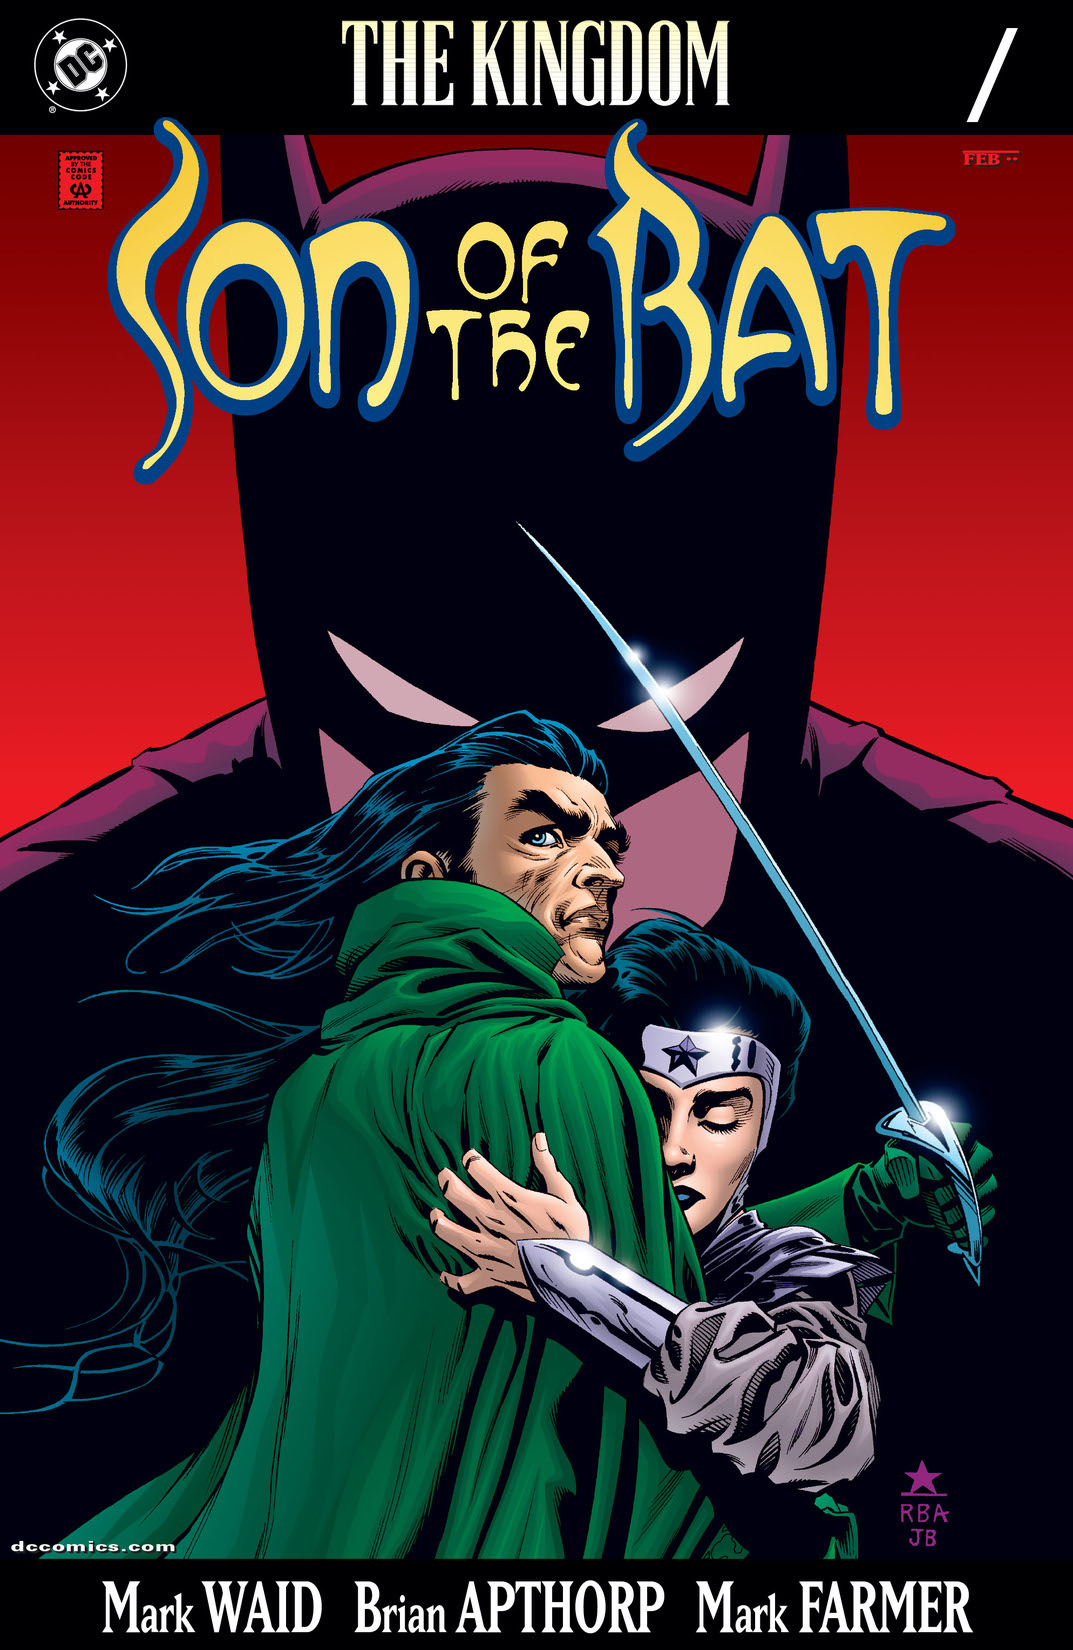 The Kingdom: Son Of The Bat #1 preview images